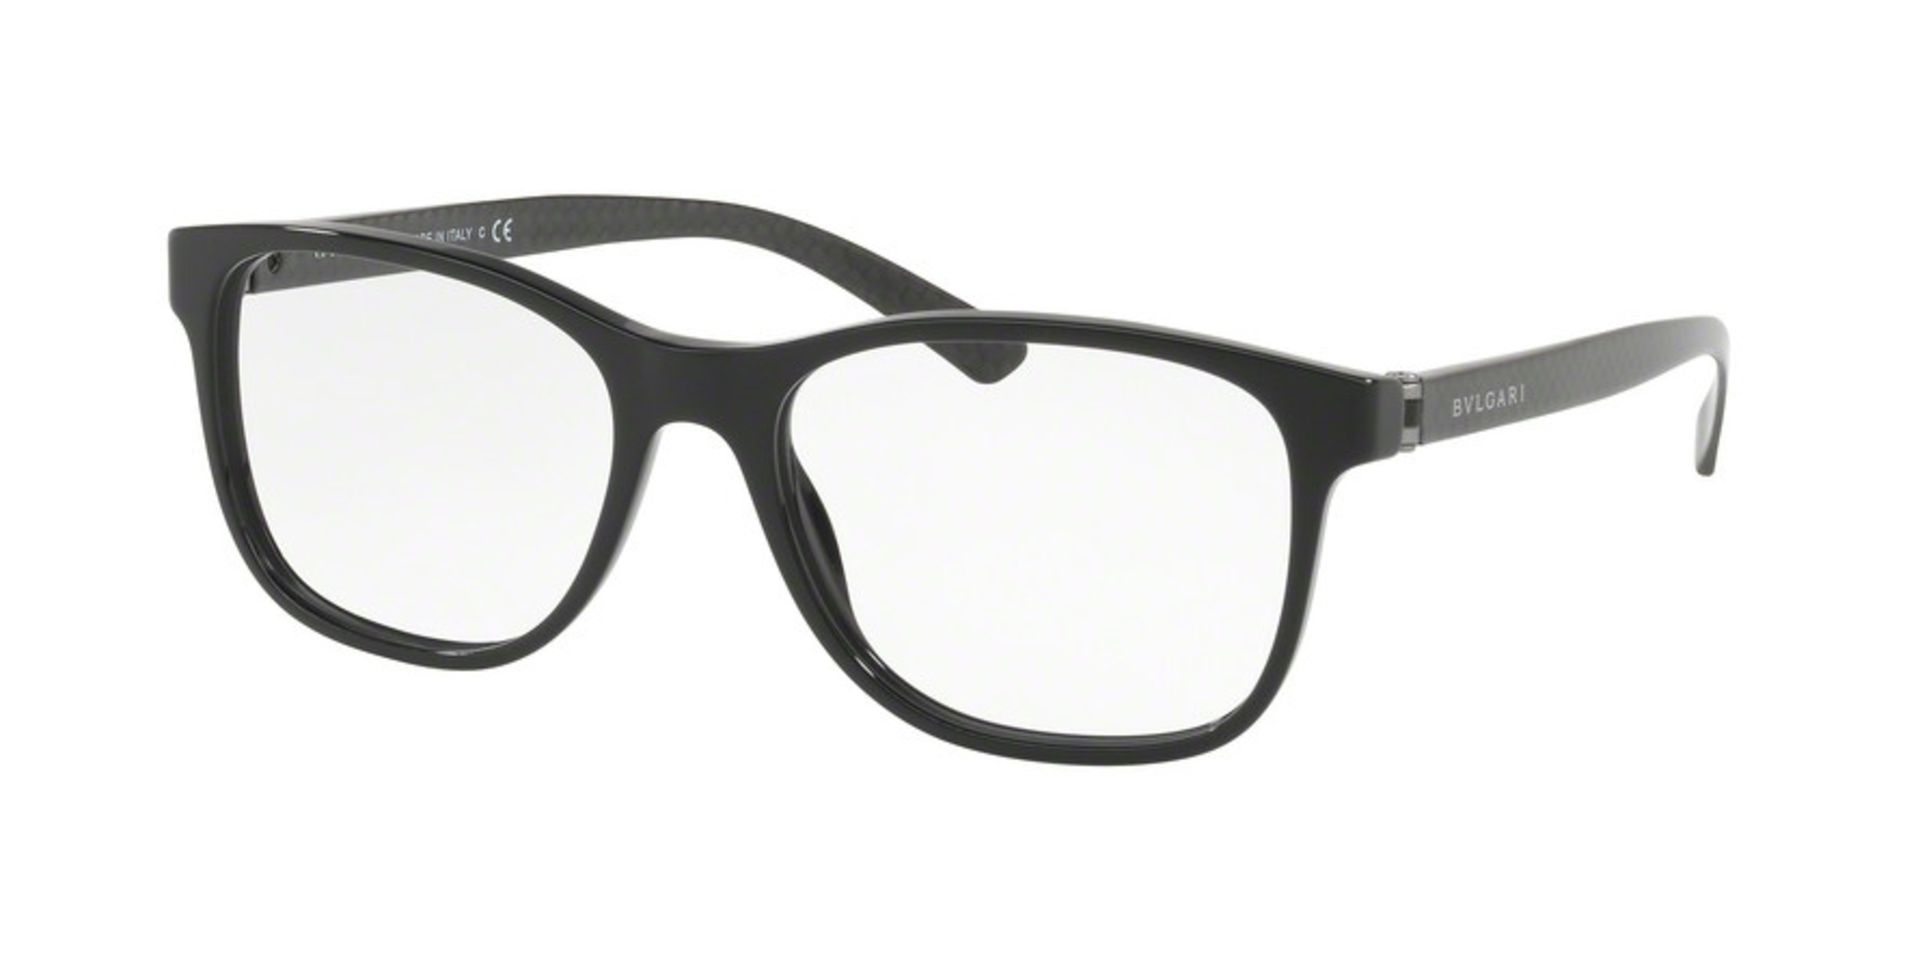 Bvlgari Gents Spectacle Frames with Original Case Surplus Stock or Ex Demo - Image 2 of 7